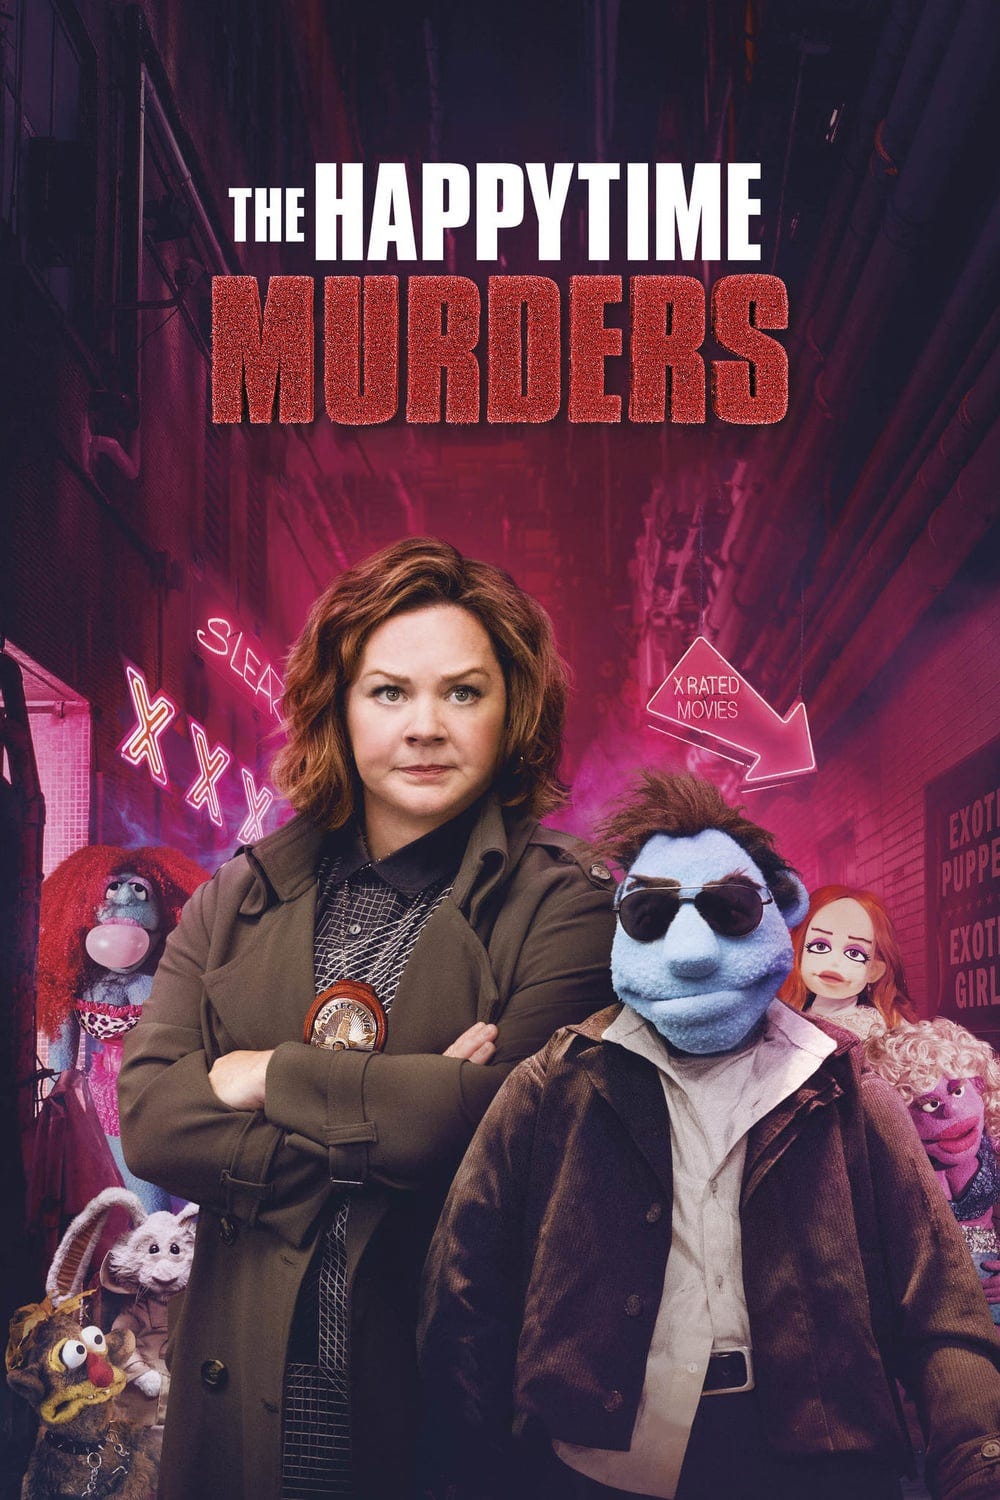 Watch Movie Full The Happytime Murders Hd Free Download 2018